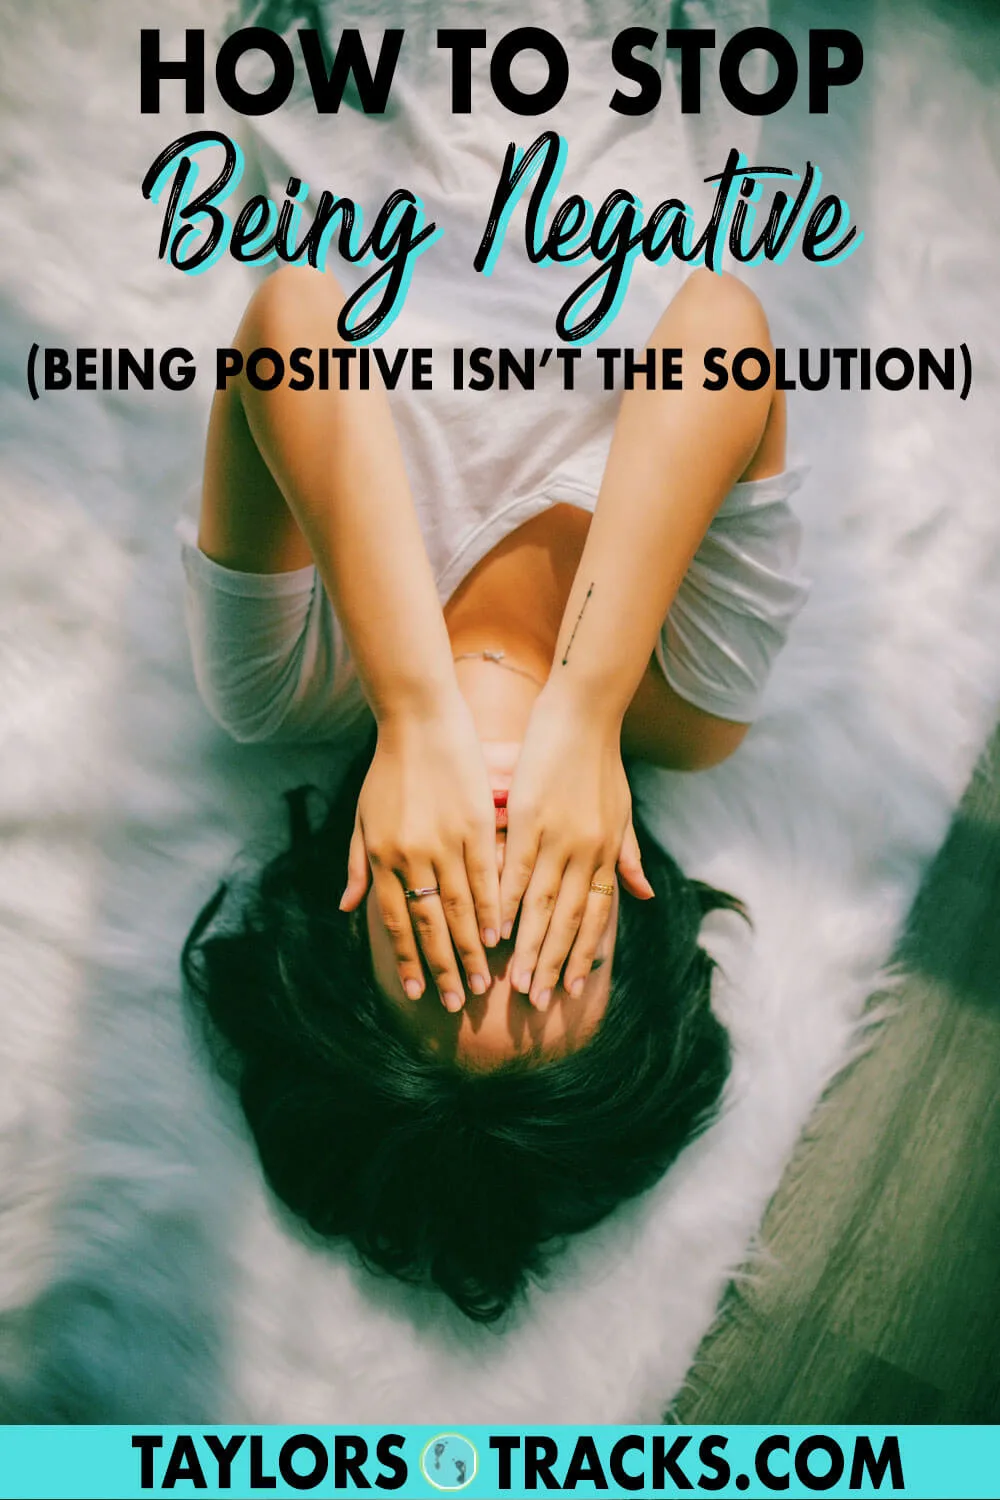 Learn how to get over negative thoughts in a healthy way and become a happier person with these mindset tips that will help you develop some self awareness. Click to learn how to stop being negative!